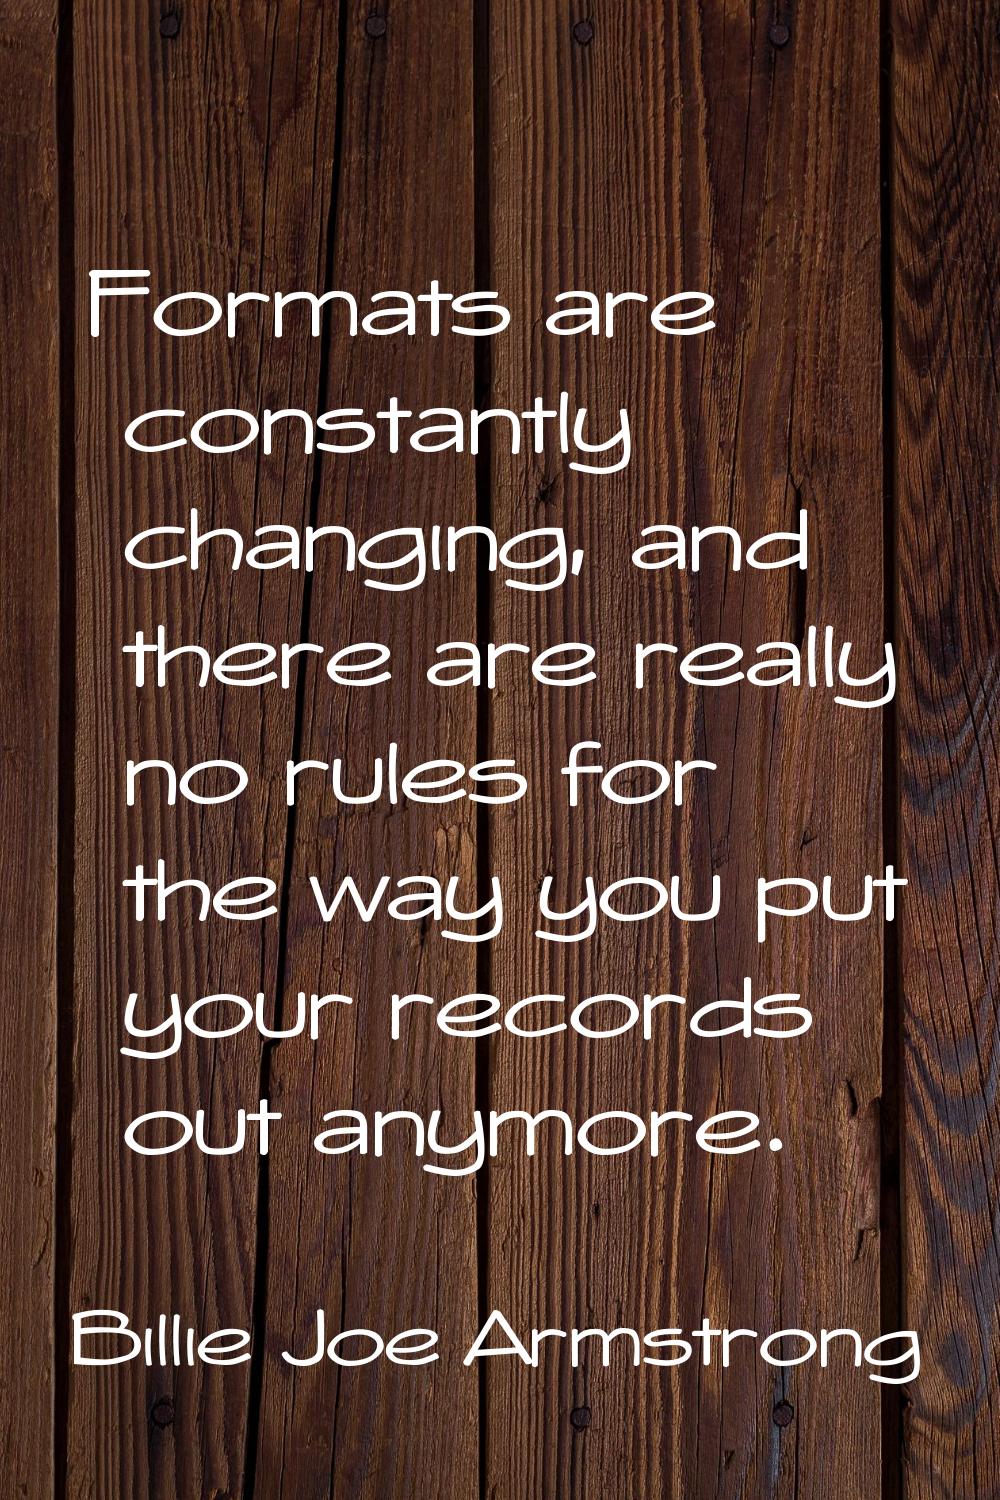 Formats are constantly changing, and there are really no rules for the way you put your records out